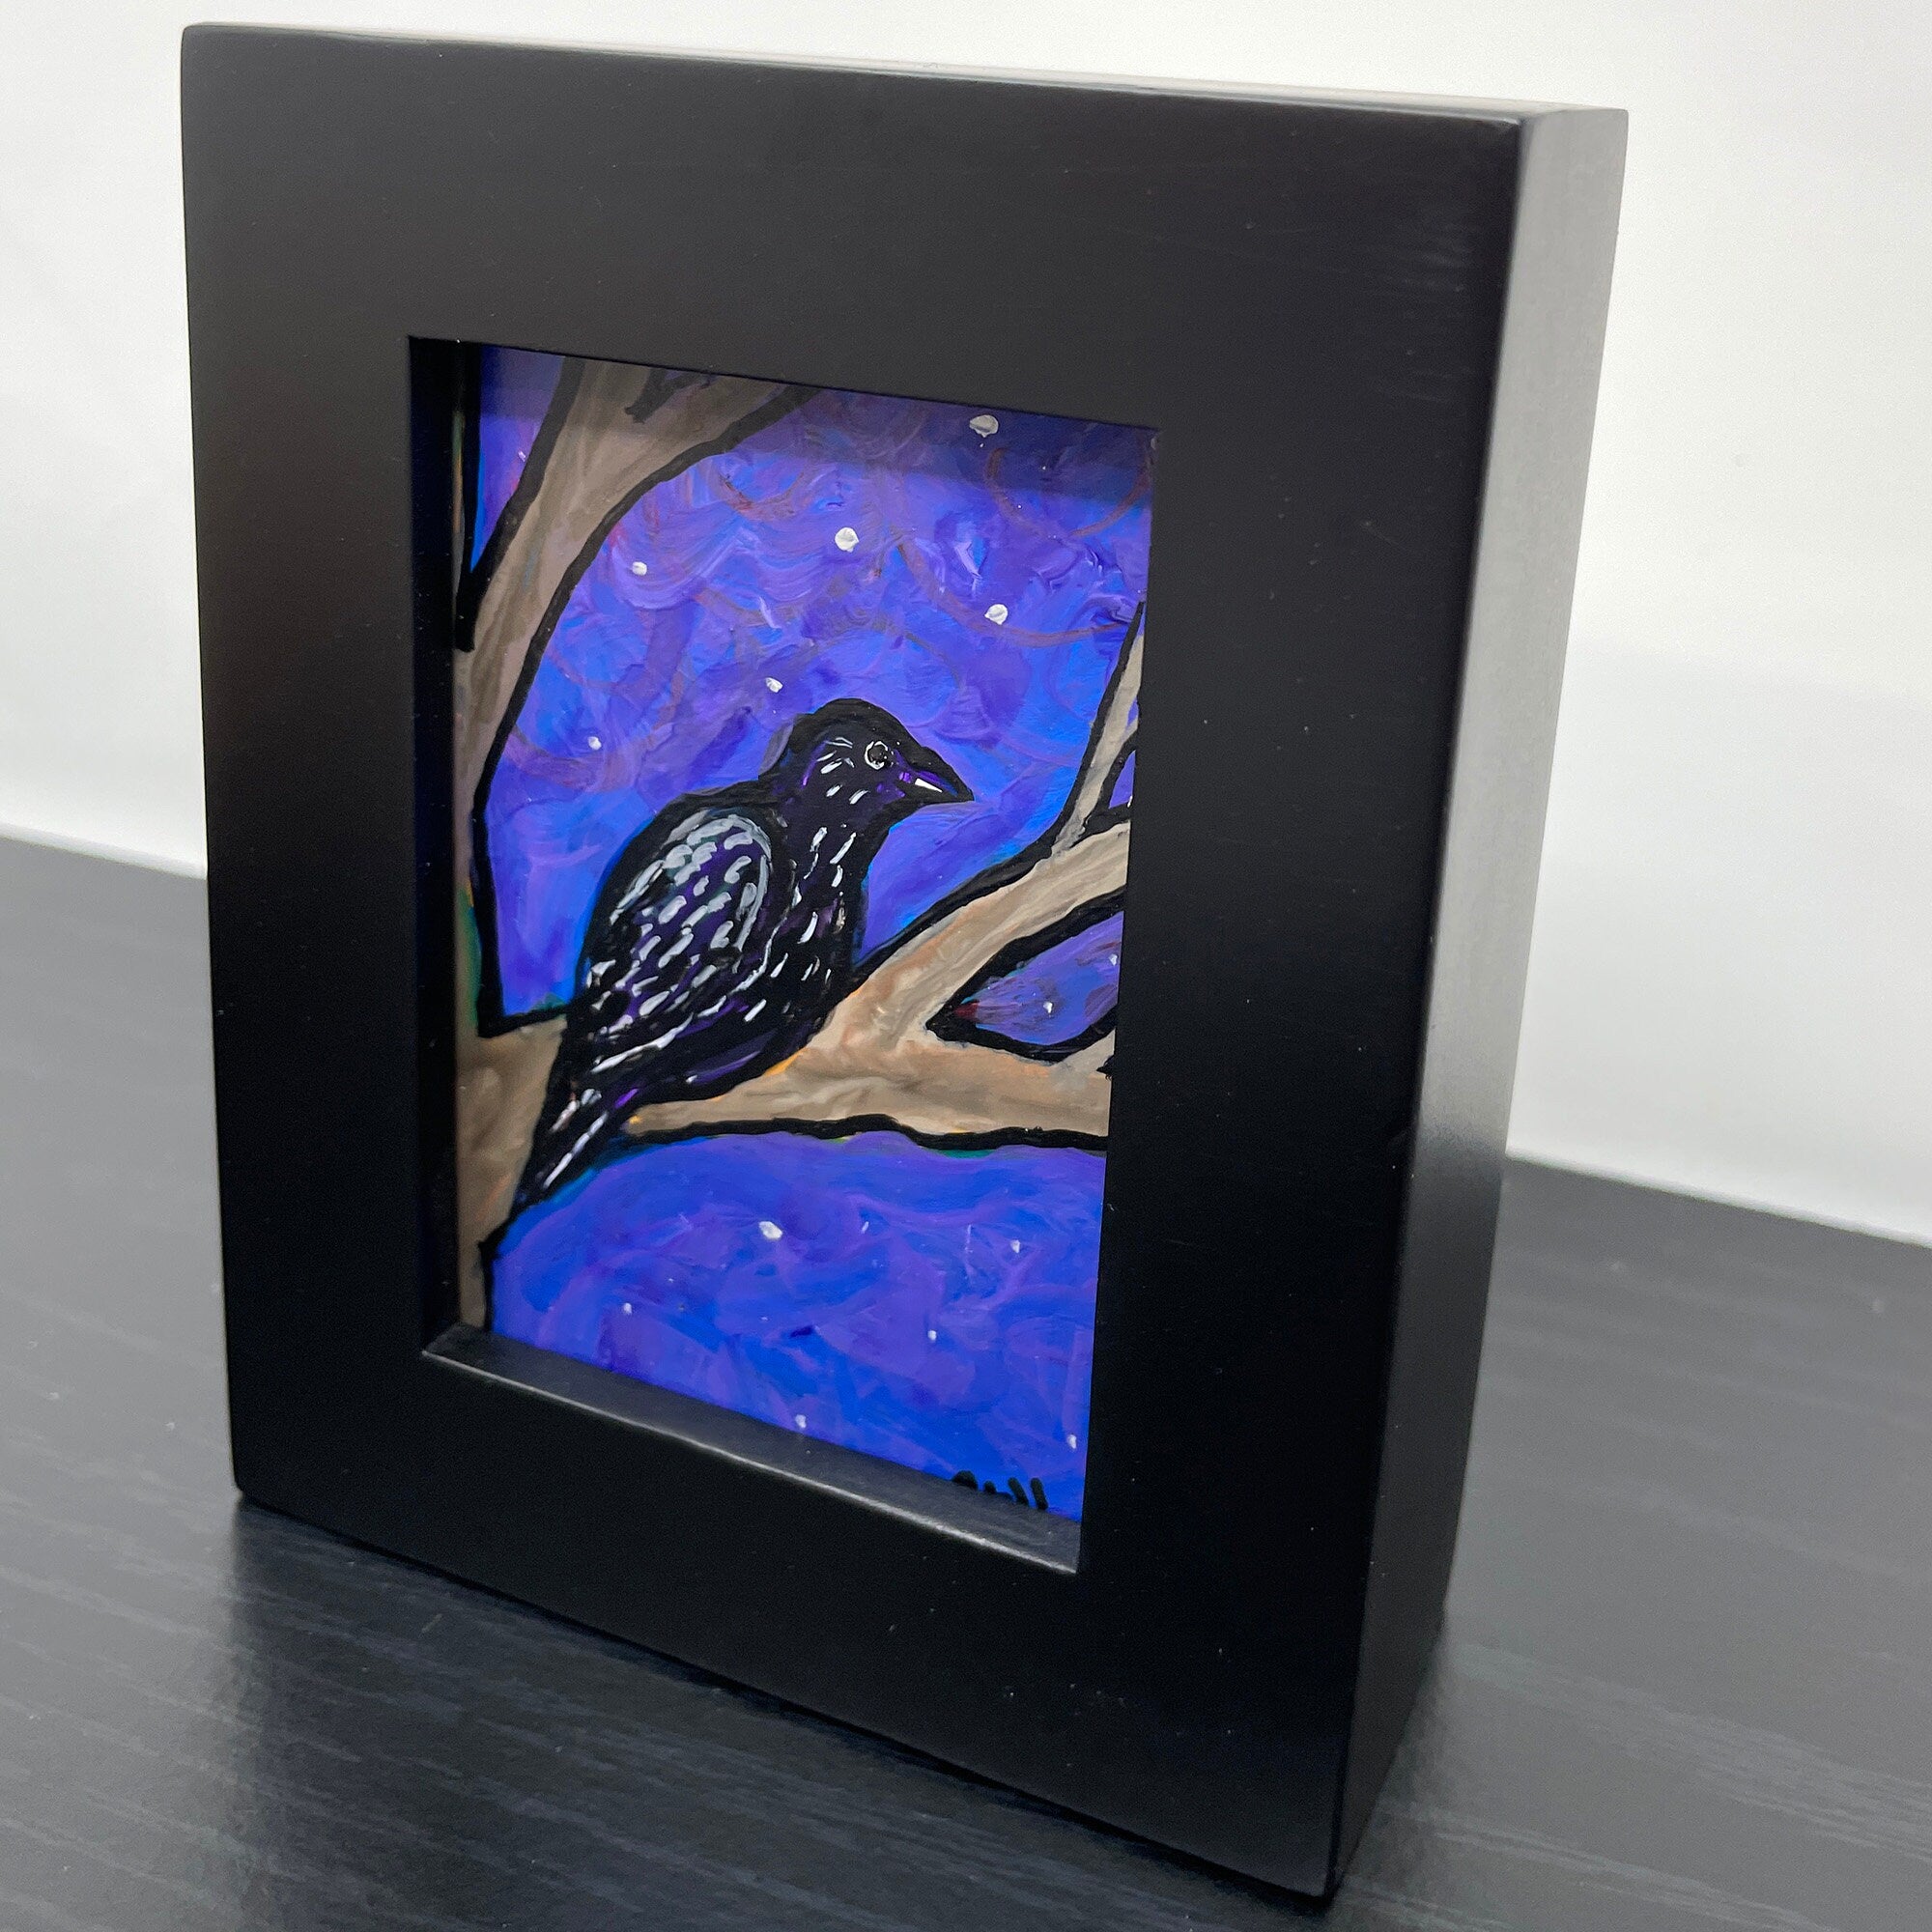 Side view of Raven painting in black frame. Raven is sitting on tree with night sky behind him.